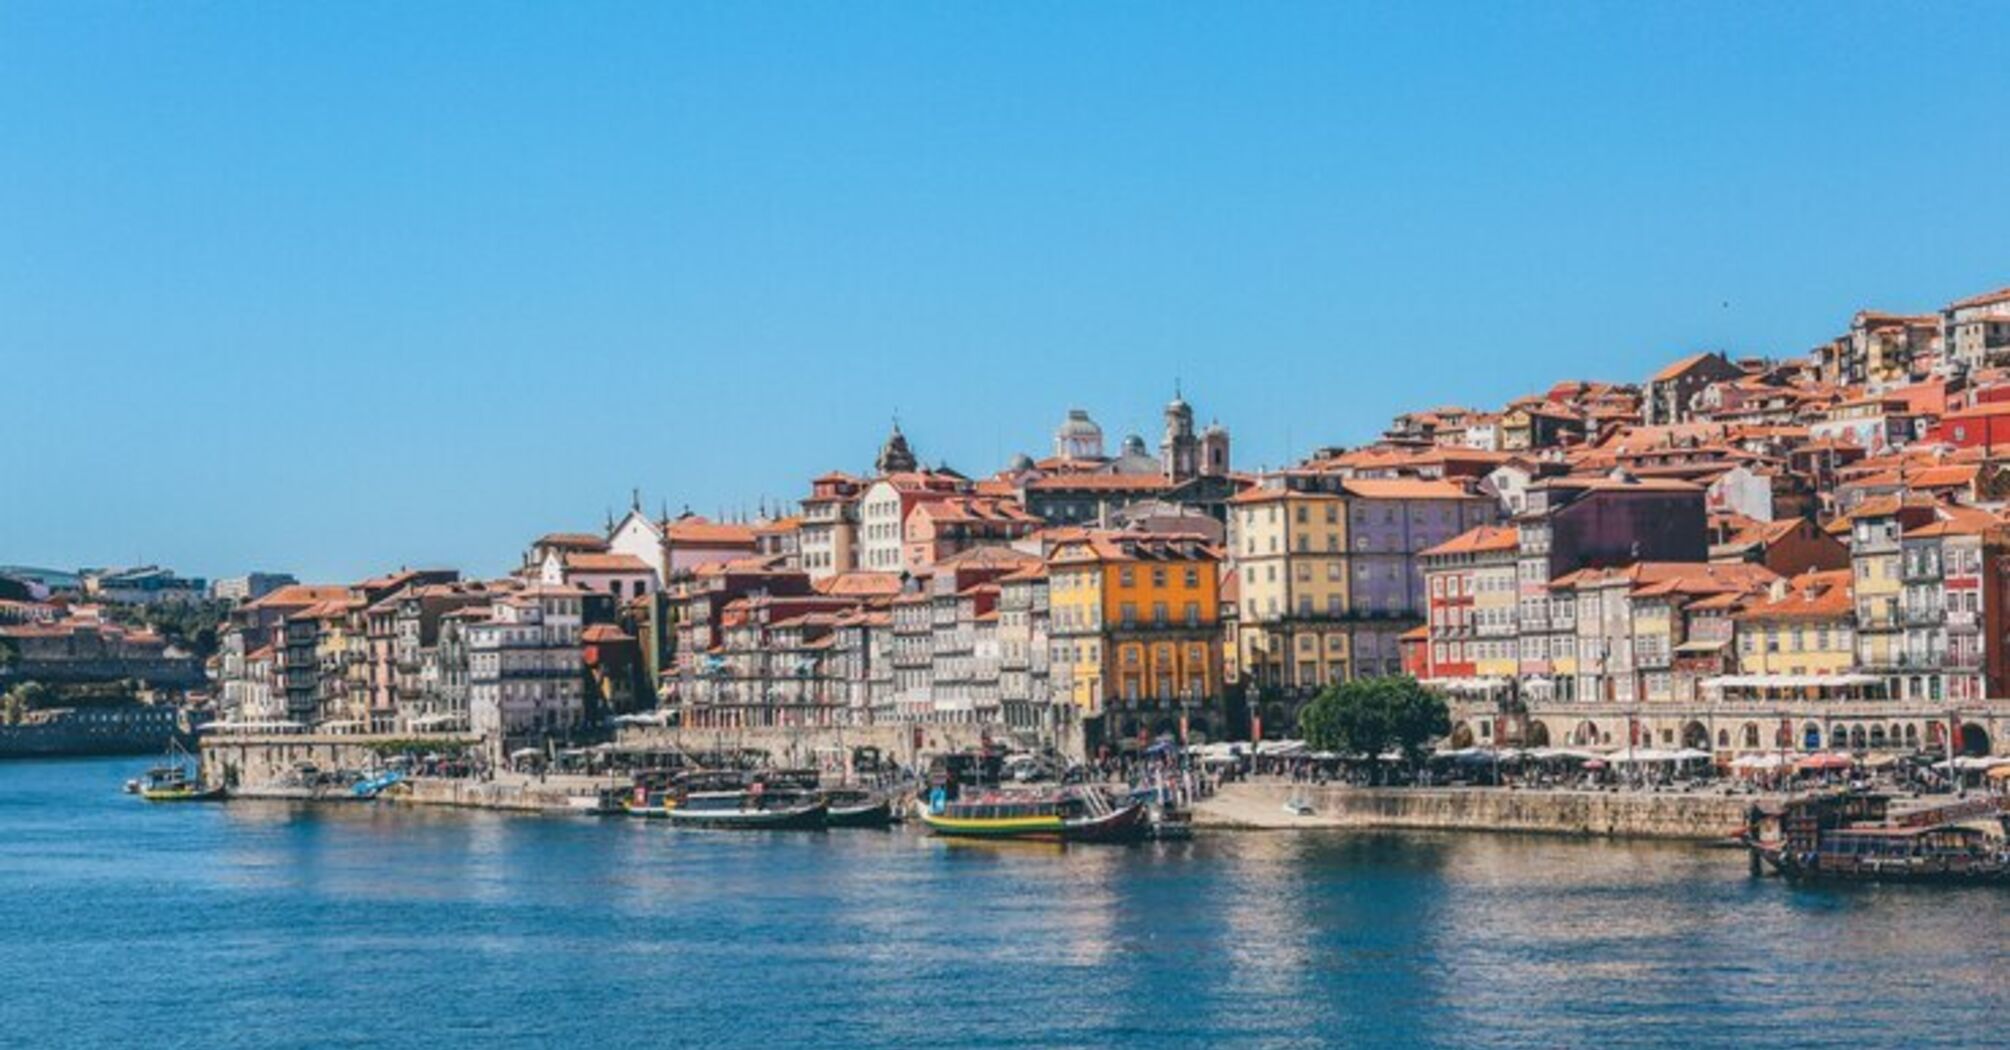 3 significant reasons why so many Americans visit Portugal